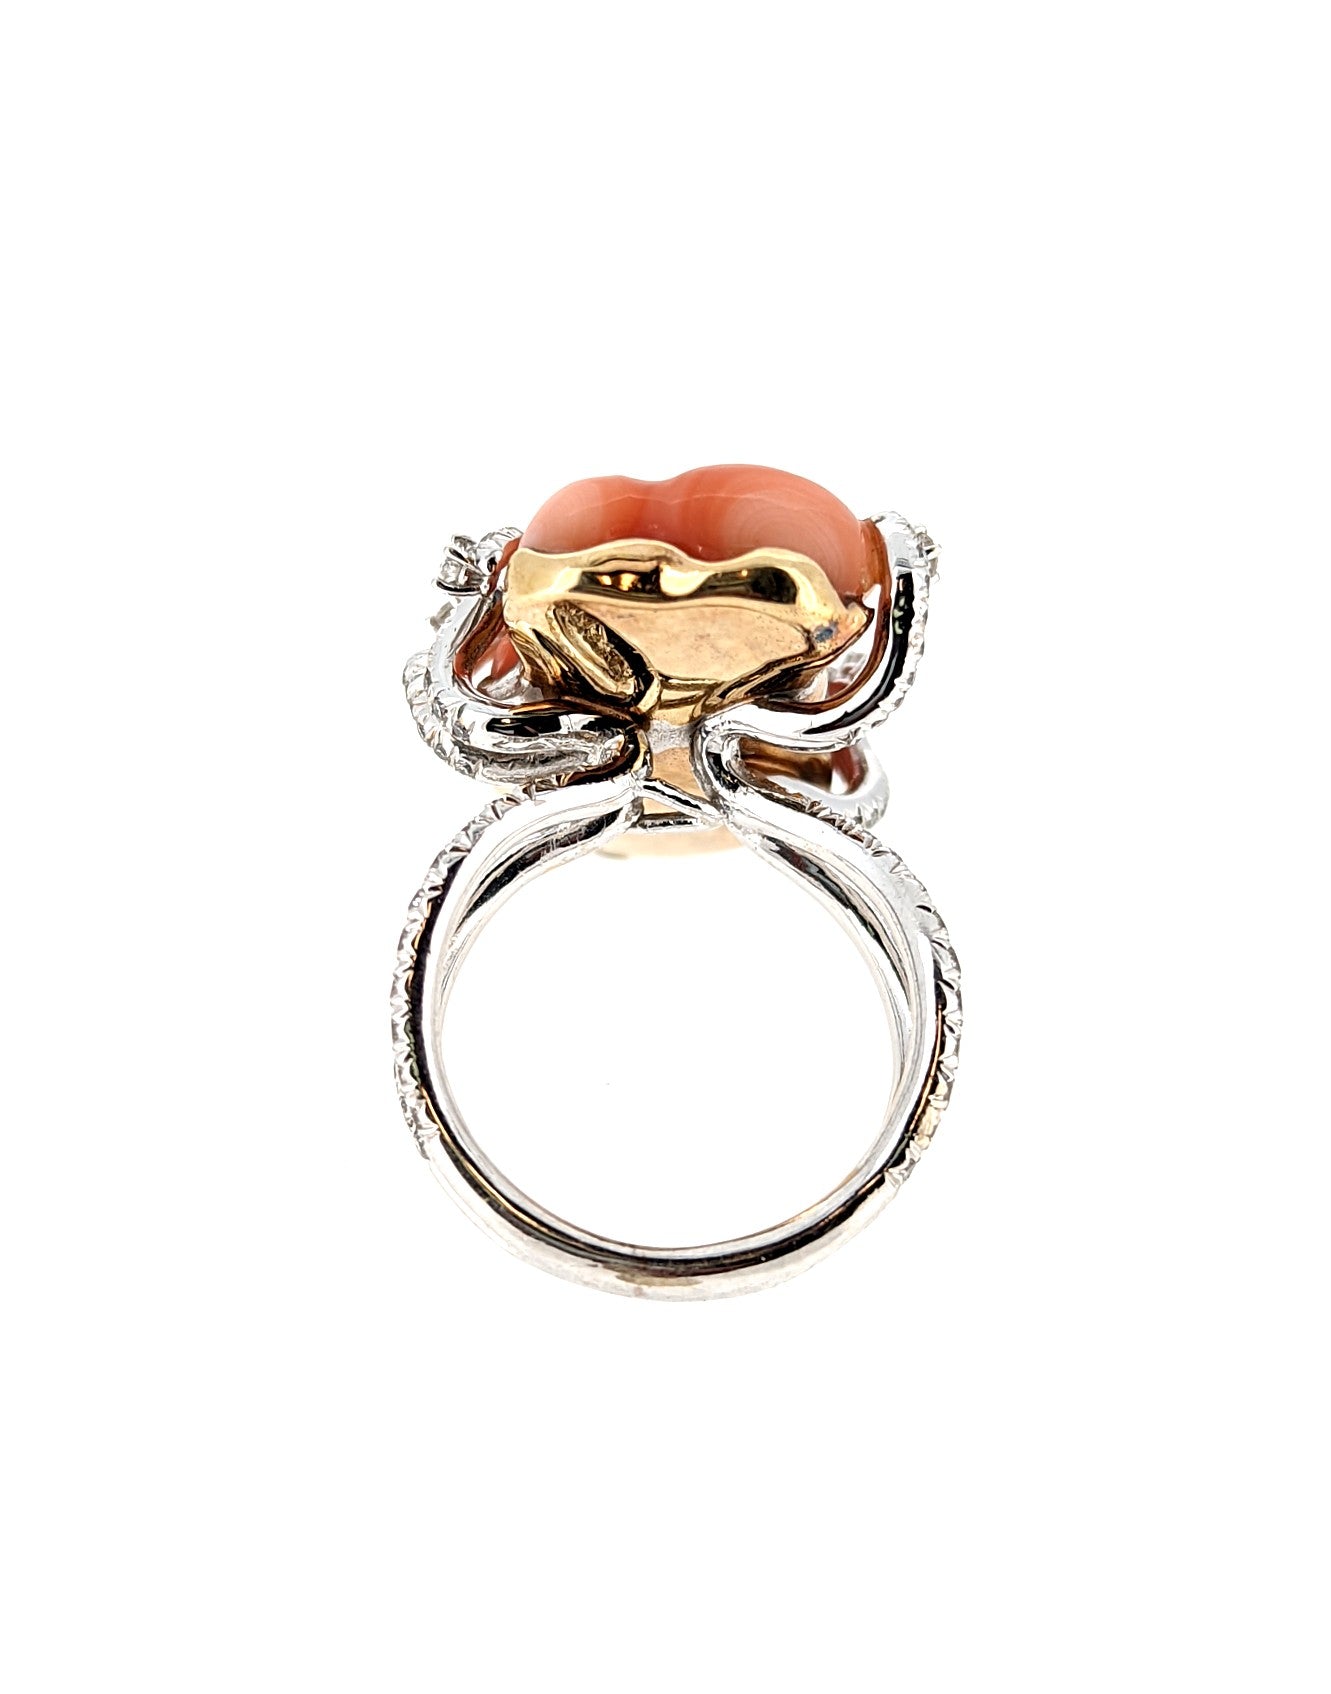 18K White Gold Natural Coral Ring with Diamond Accents